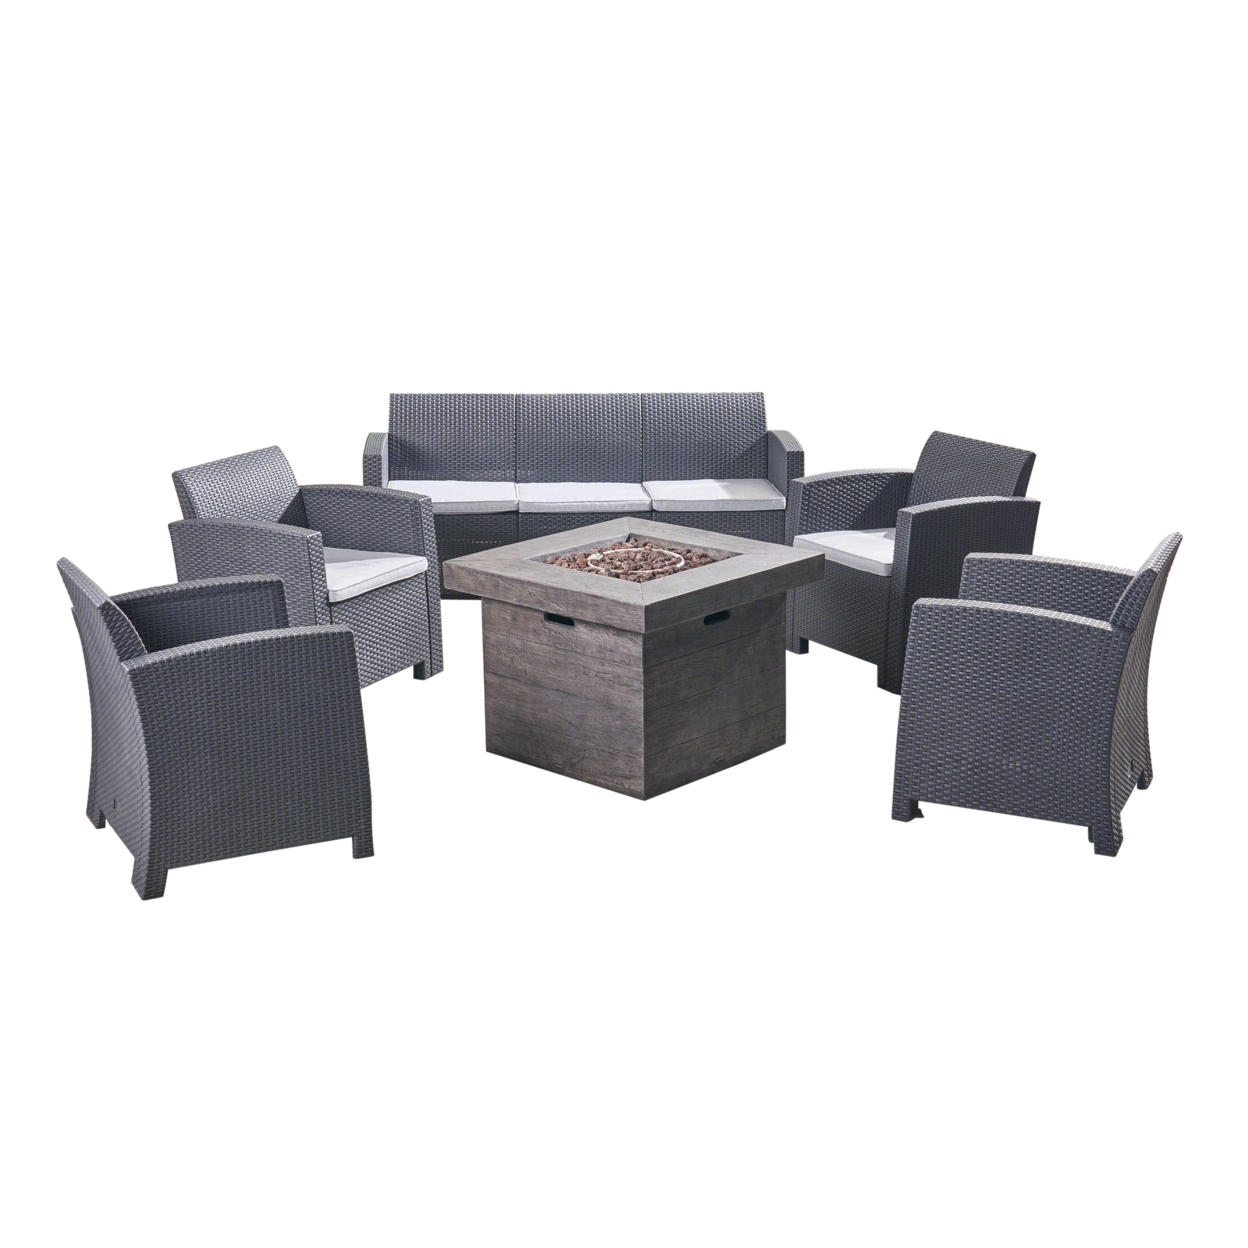 Peter Outdoor For 7 Chat Set& Fire Pit - Gray